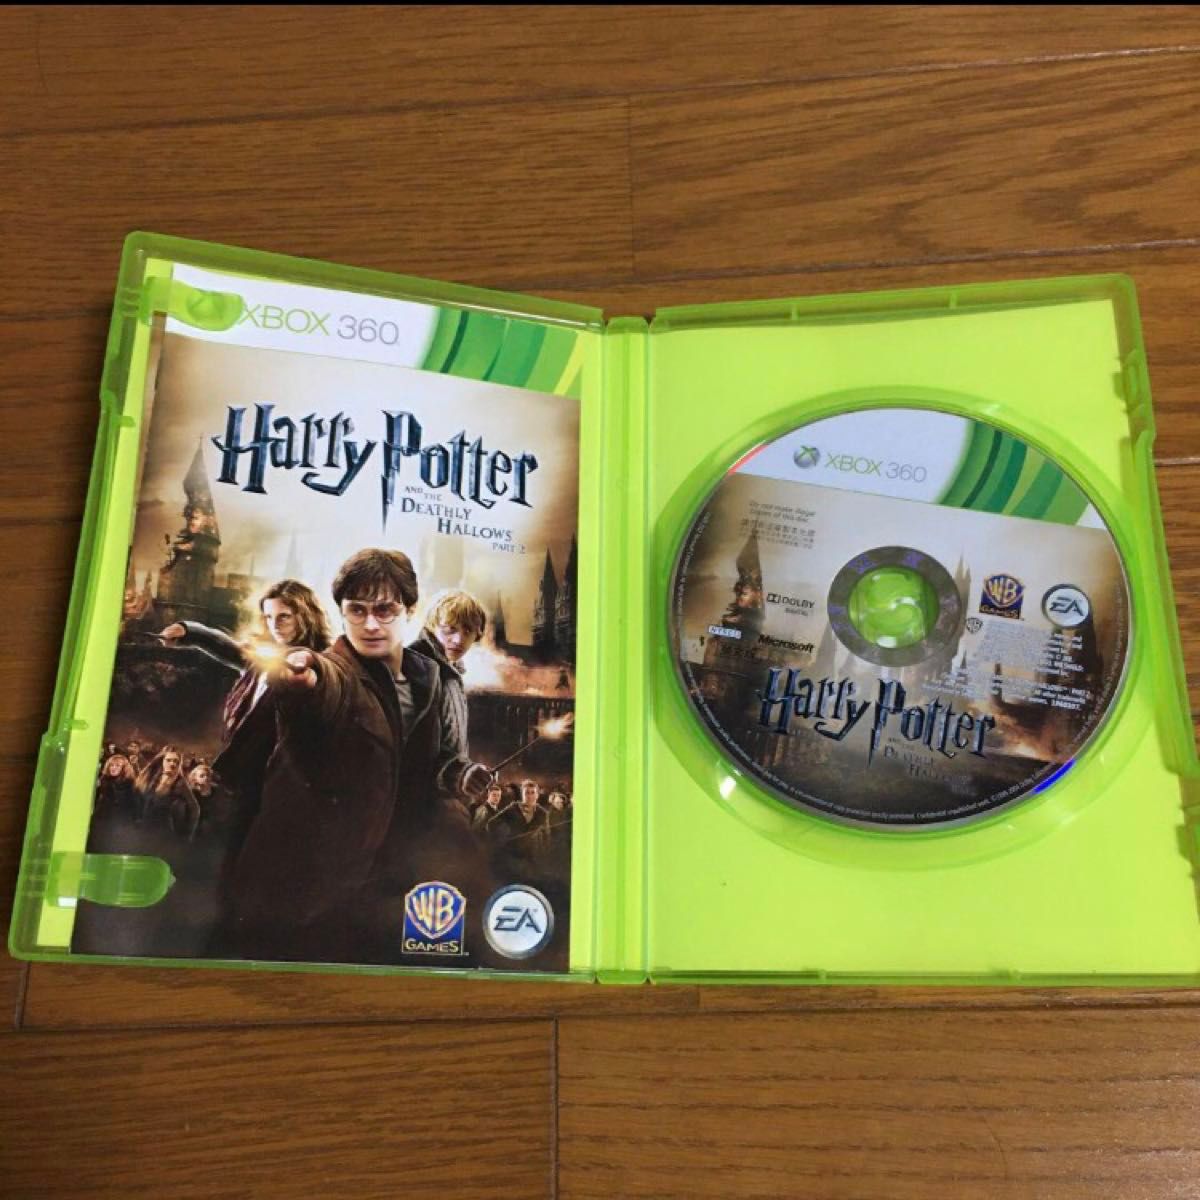 XBOX360 ハリーポッターと死の秘宝 Part 2 Harry Potter and The Deathly Hallows